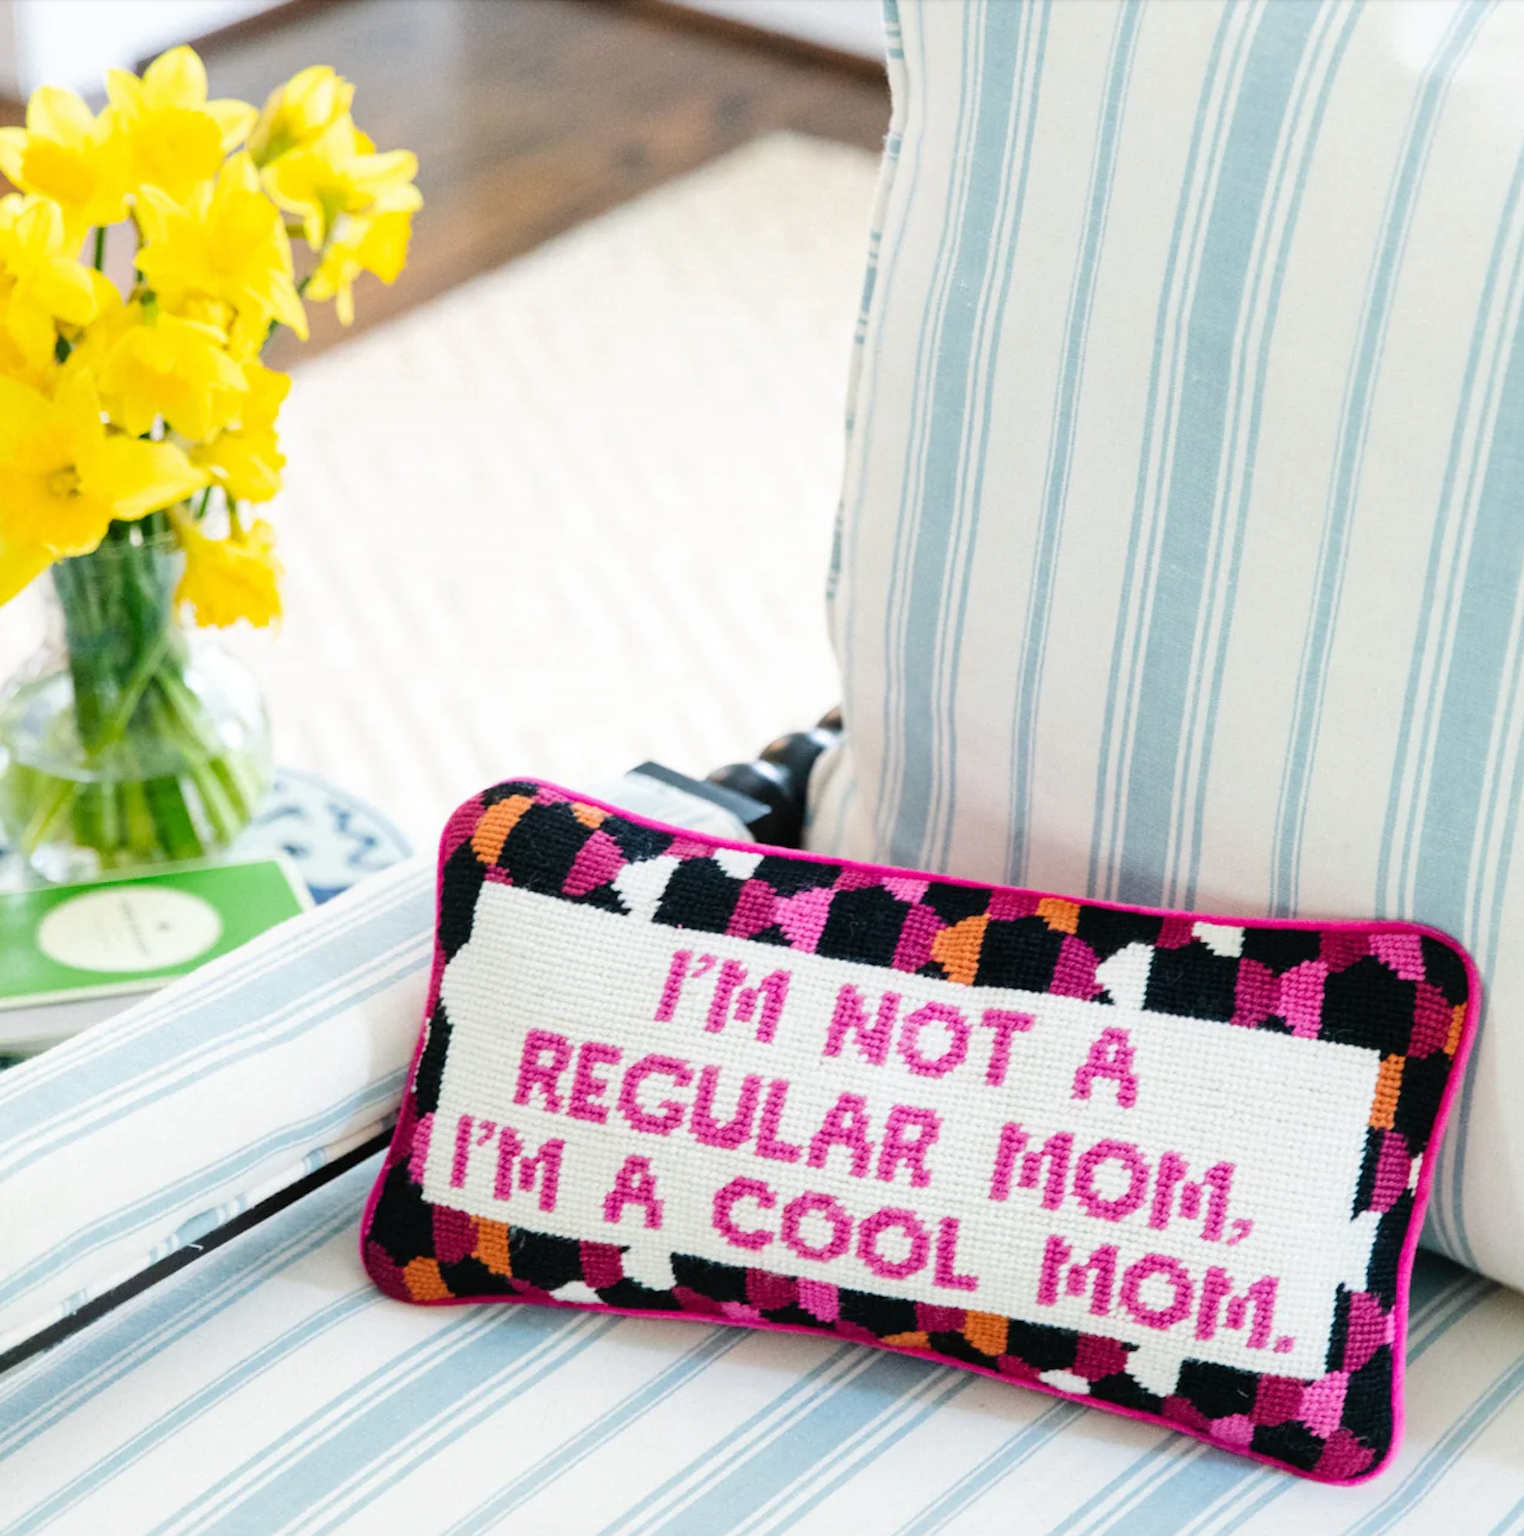 COOL MOM NEEDLEPOINT PILLOW